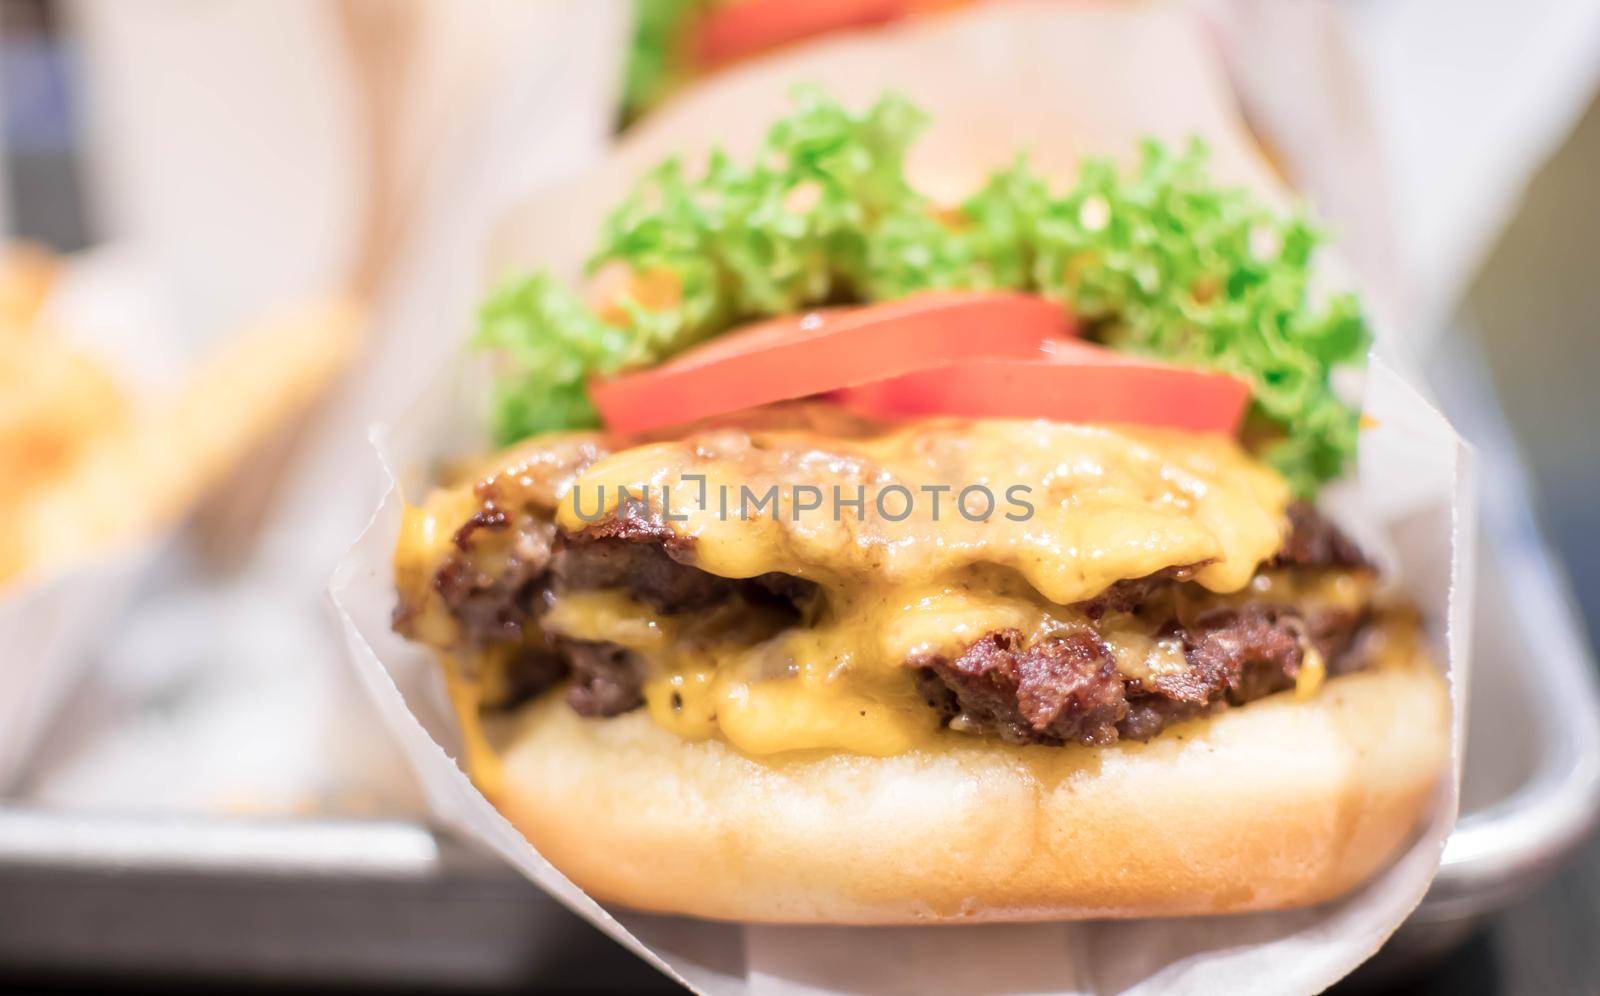 Shake shack burger yummy beef burger with melting cheese and vegetables.